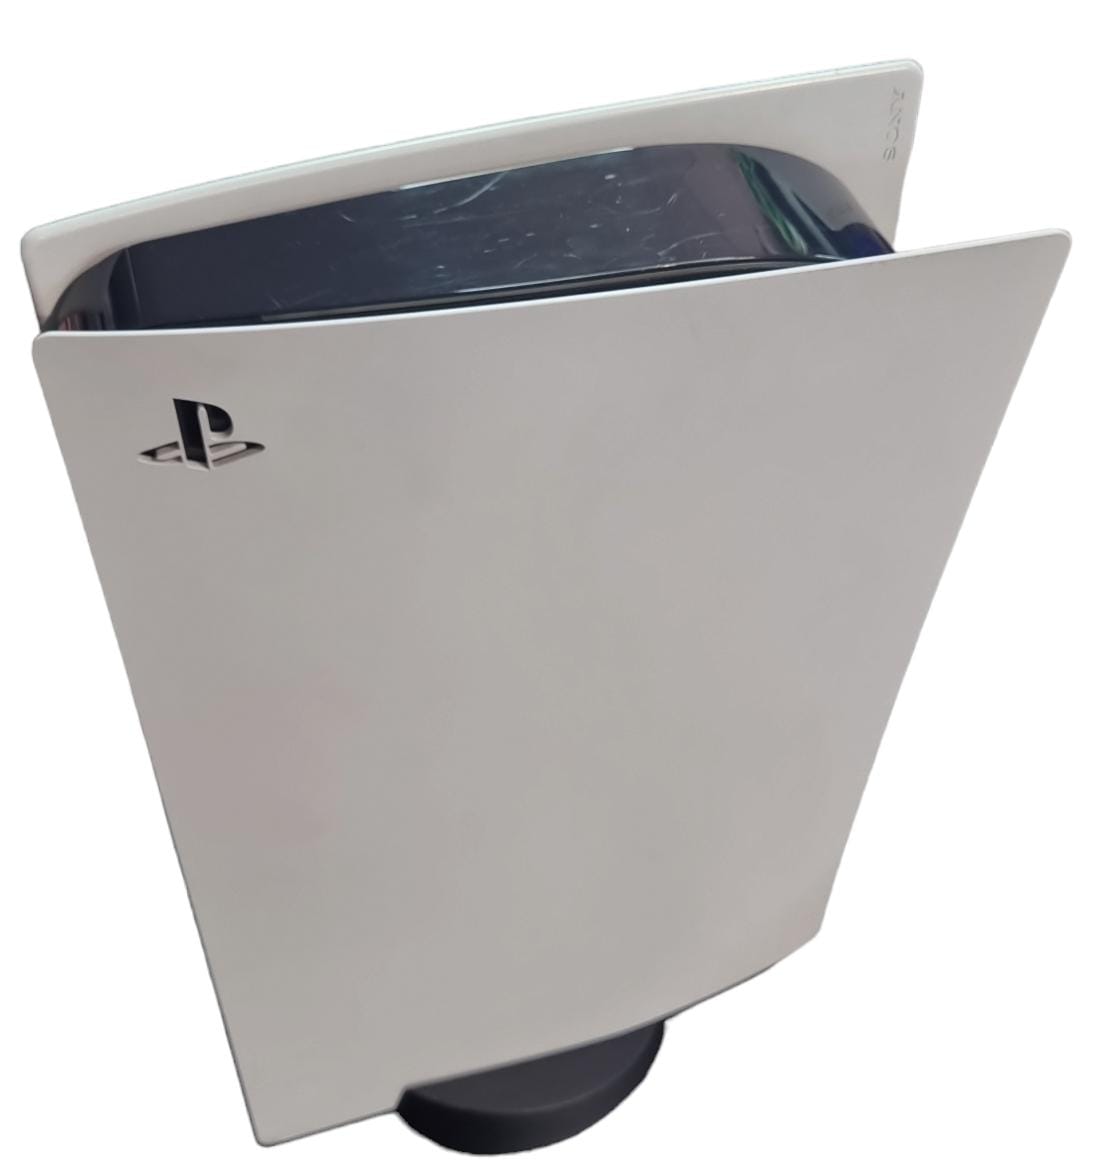 Sony Ps5 Disc Edition Console - CFI-1216A - 825GB Capacity - White with stand, pad and cables